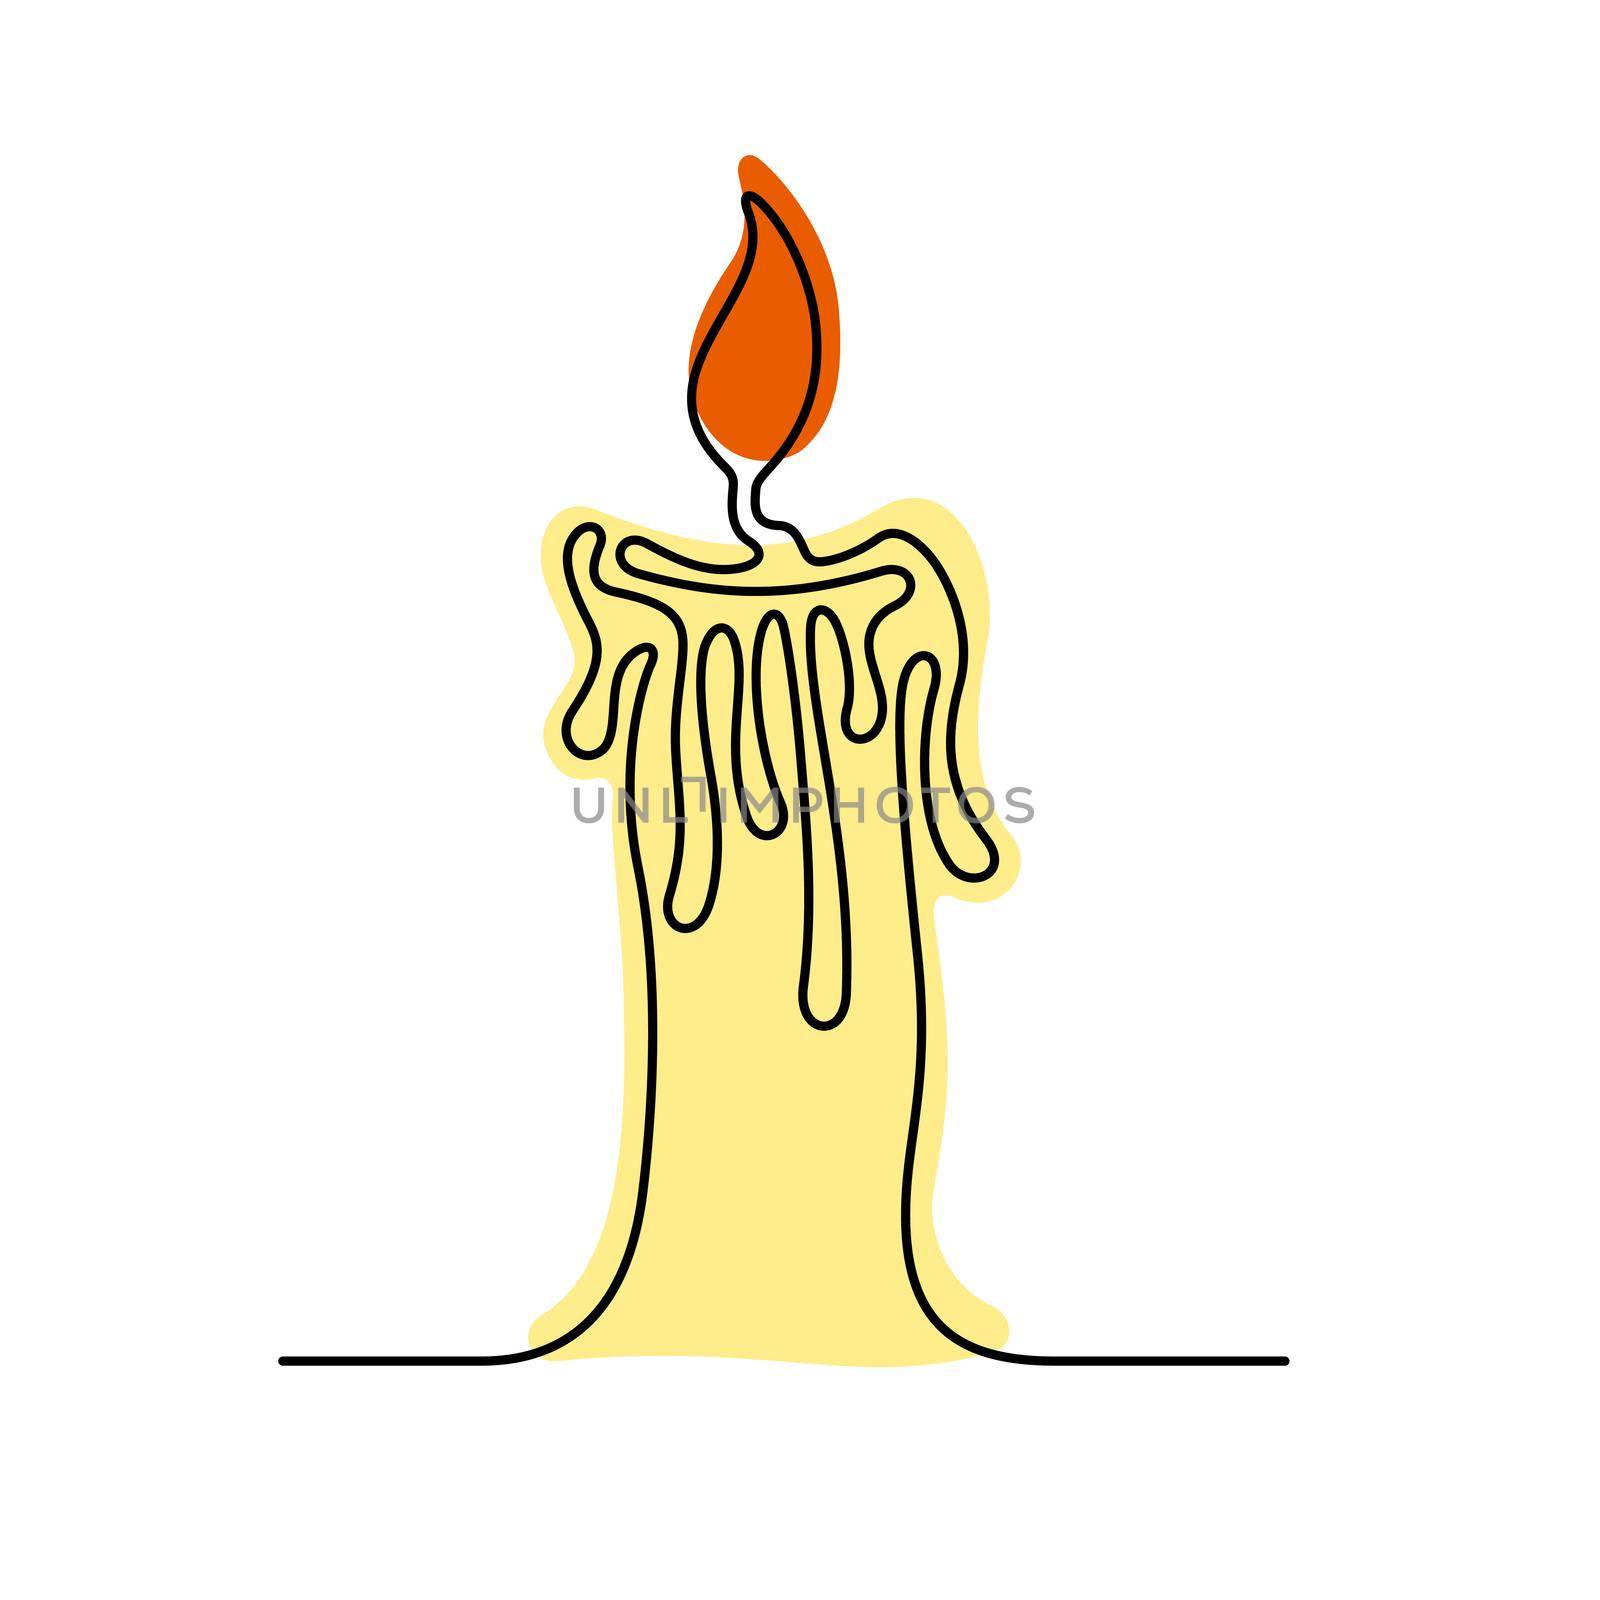 Candle beautiful minimal continuous line. Isolated vector illustration. Christmas design for cards, posters, banners.